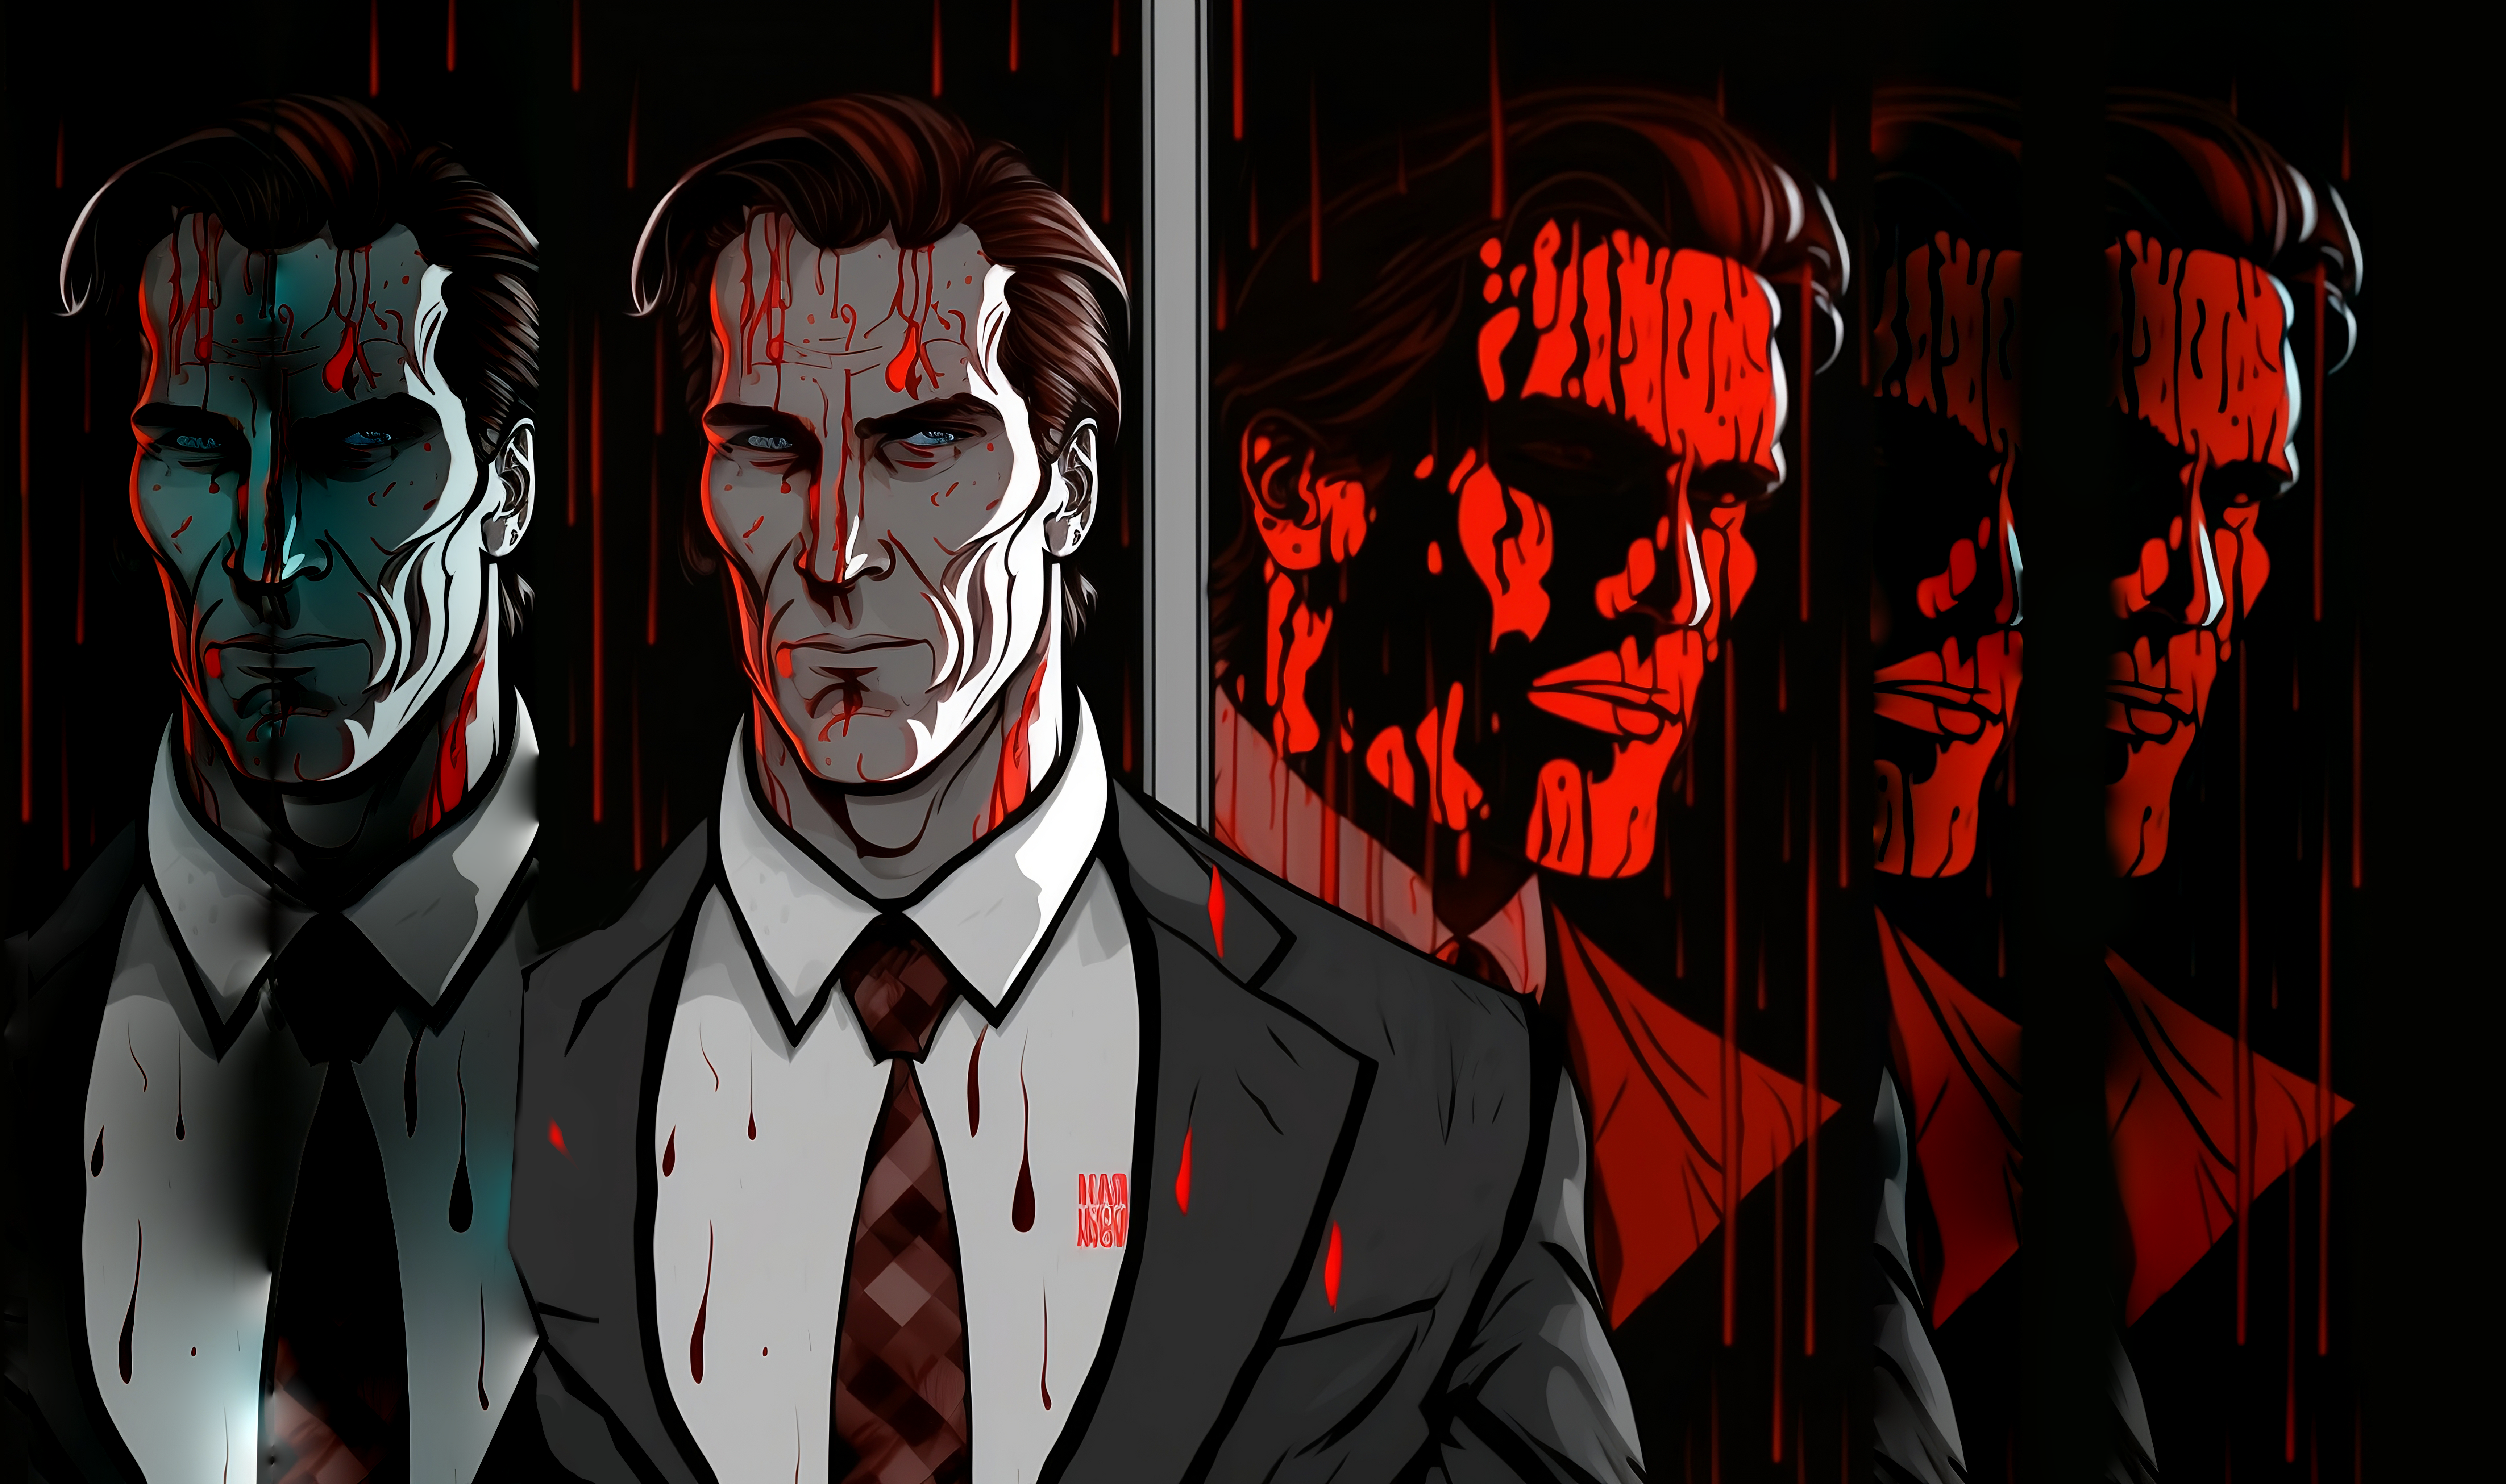 General 6915x4096 men blood suits tie suit and tie American Psycho Christian Bale movie characters digital art